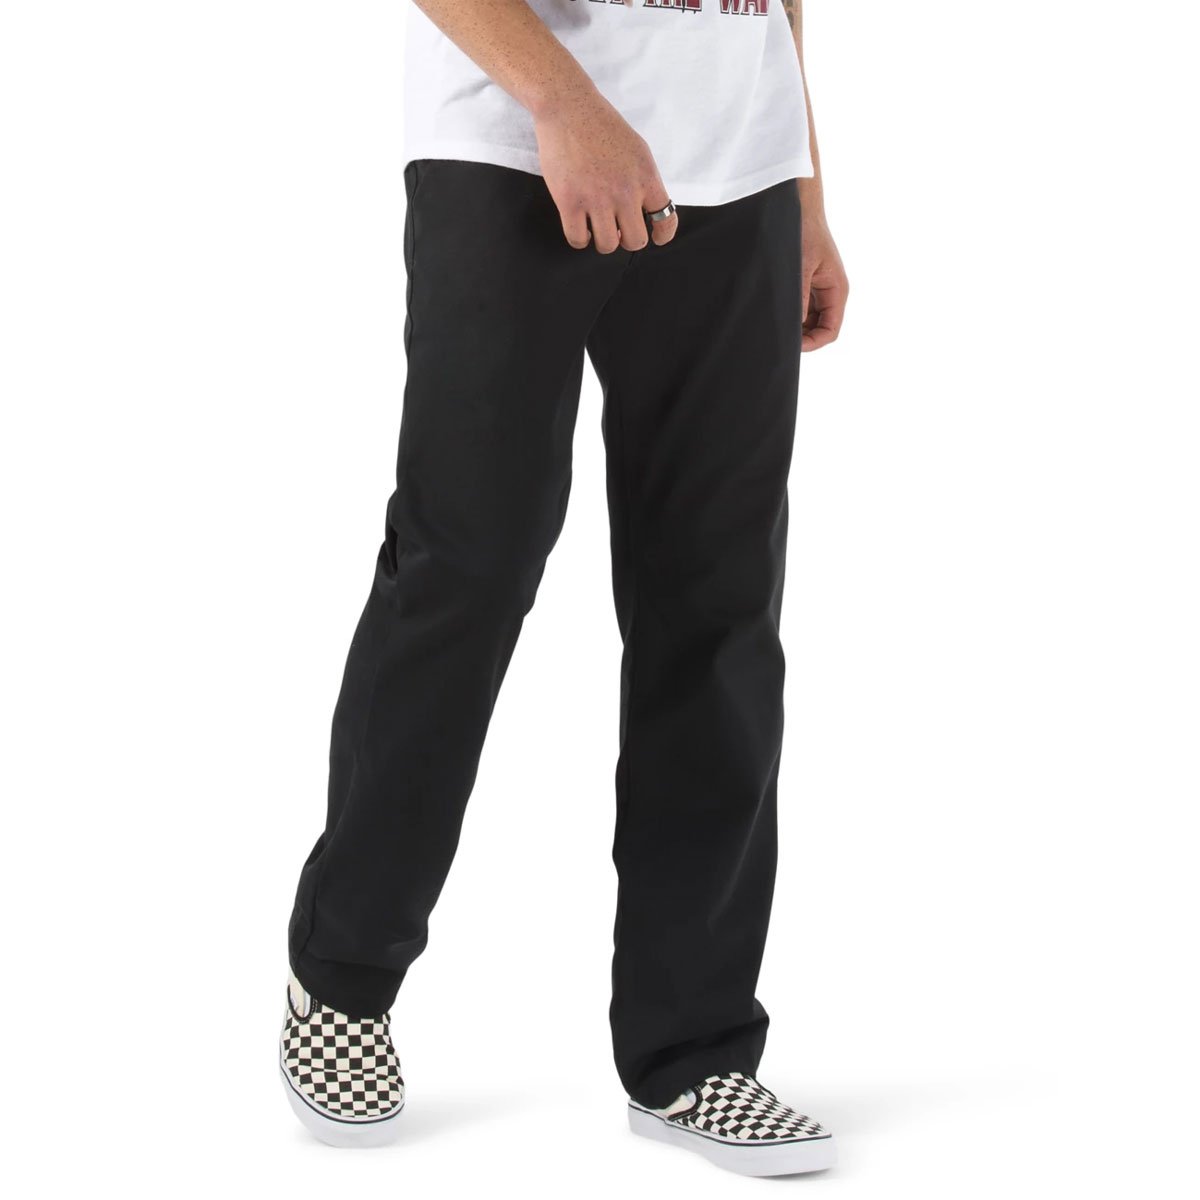 Vans Authentic Chino Relaxed Pants - black image 1